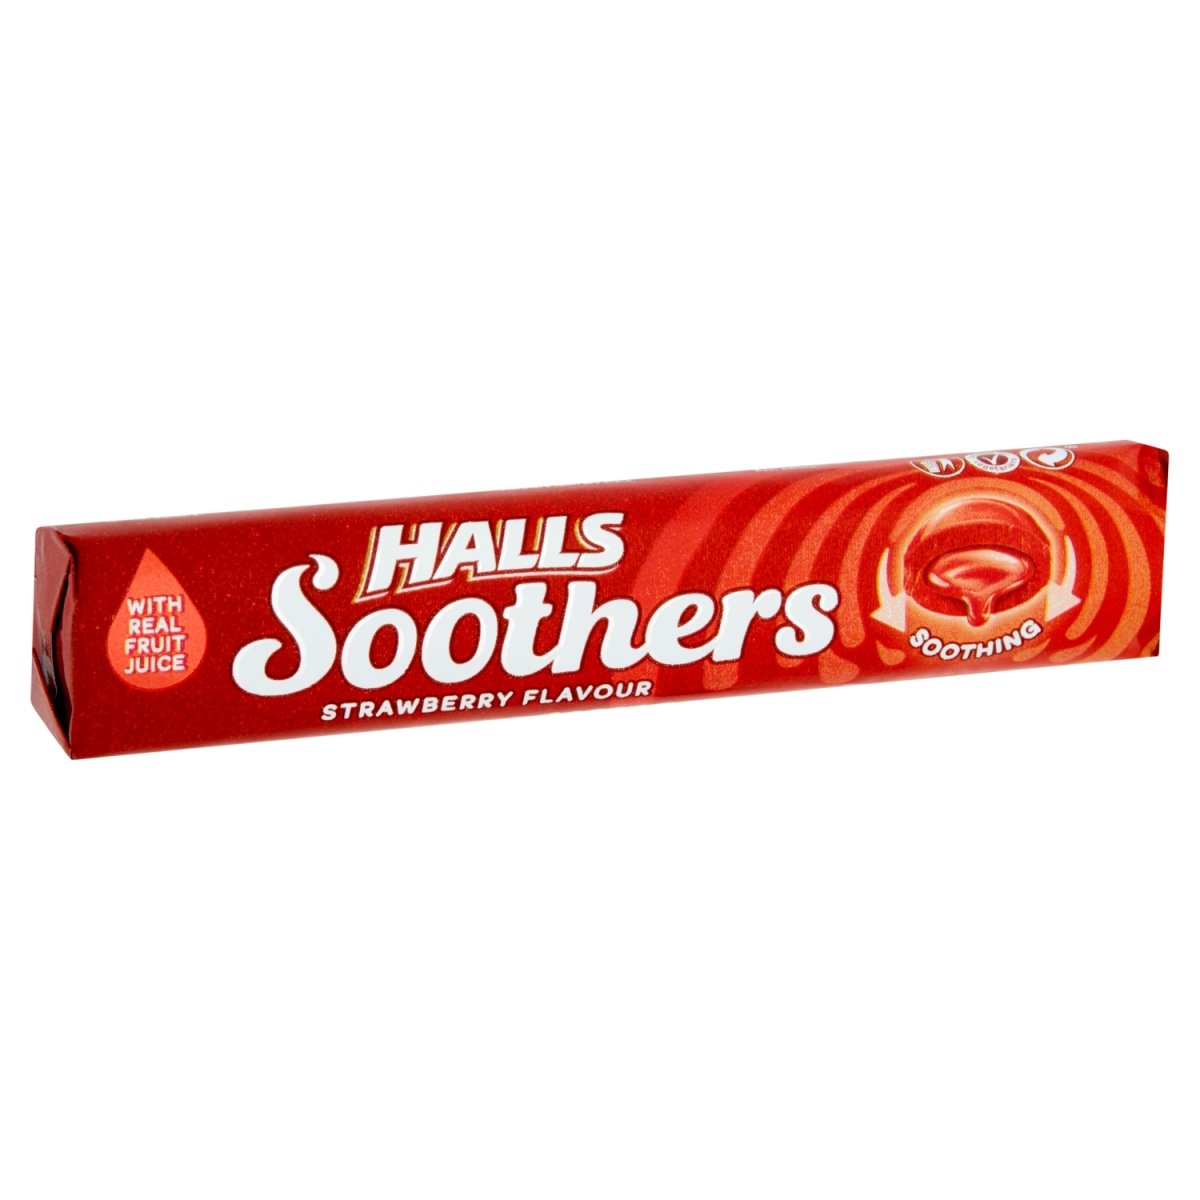 Halls Soothers Strawberry - Intamarque 5034660508038